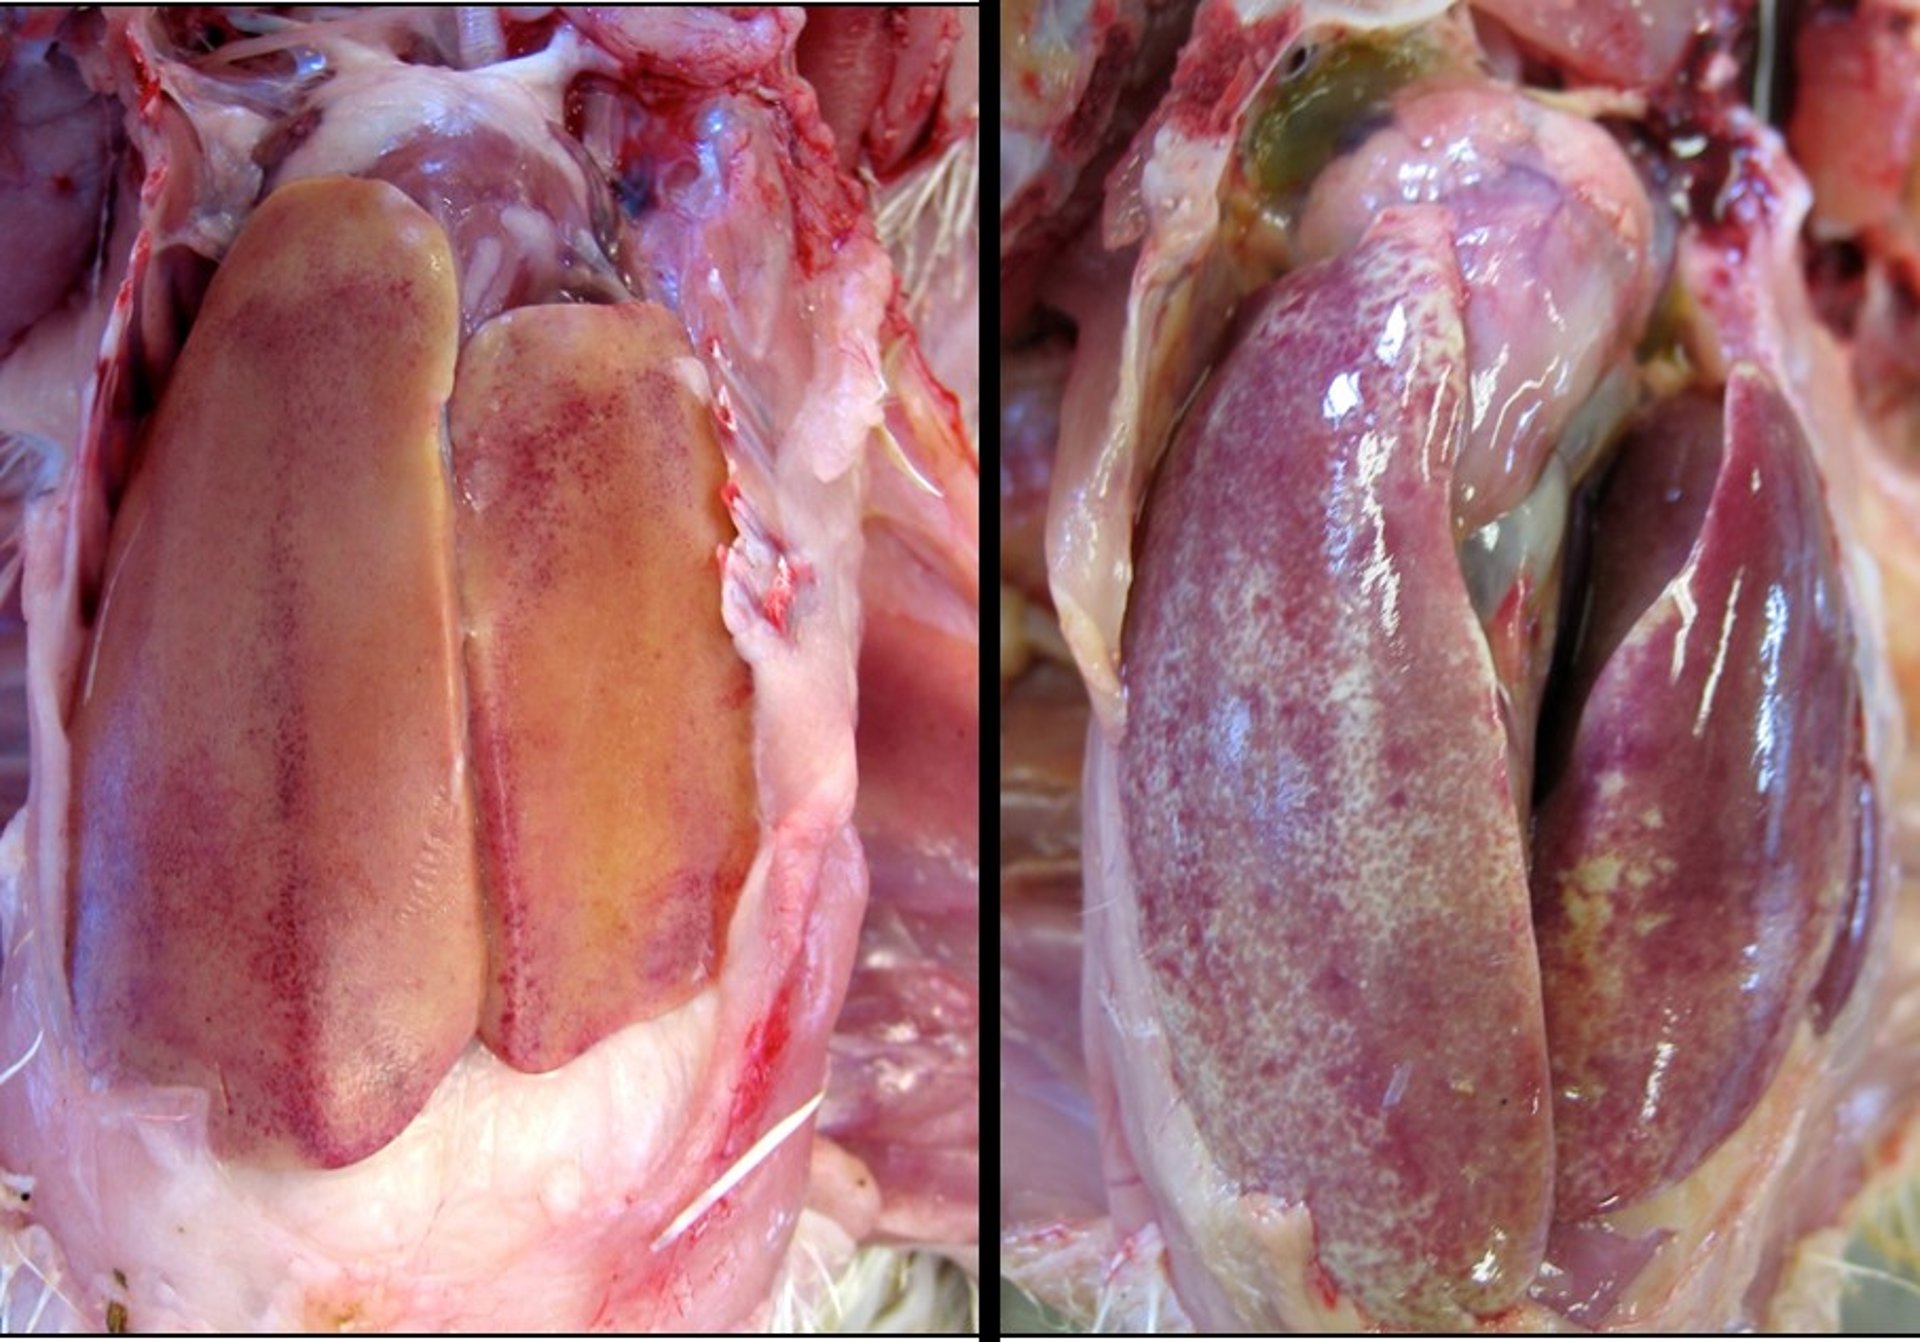 Gross hepatic lesions, IBH and HHS